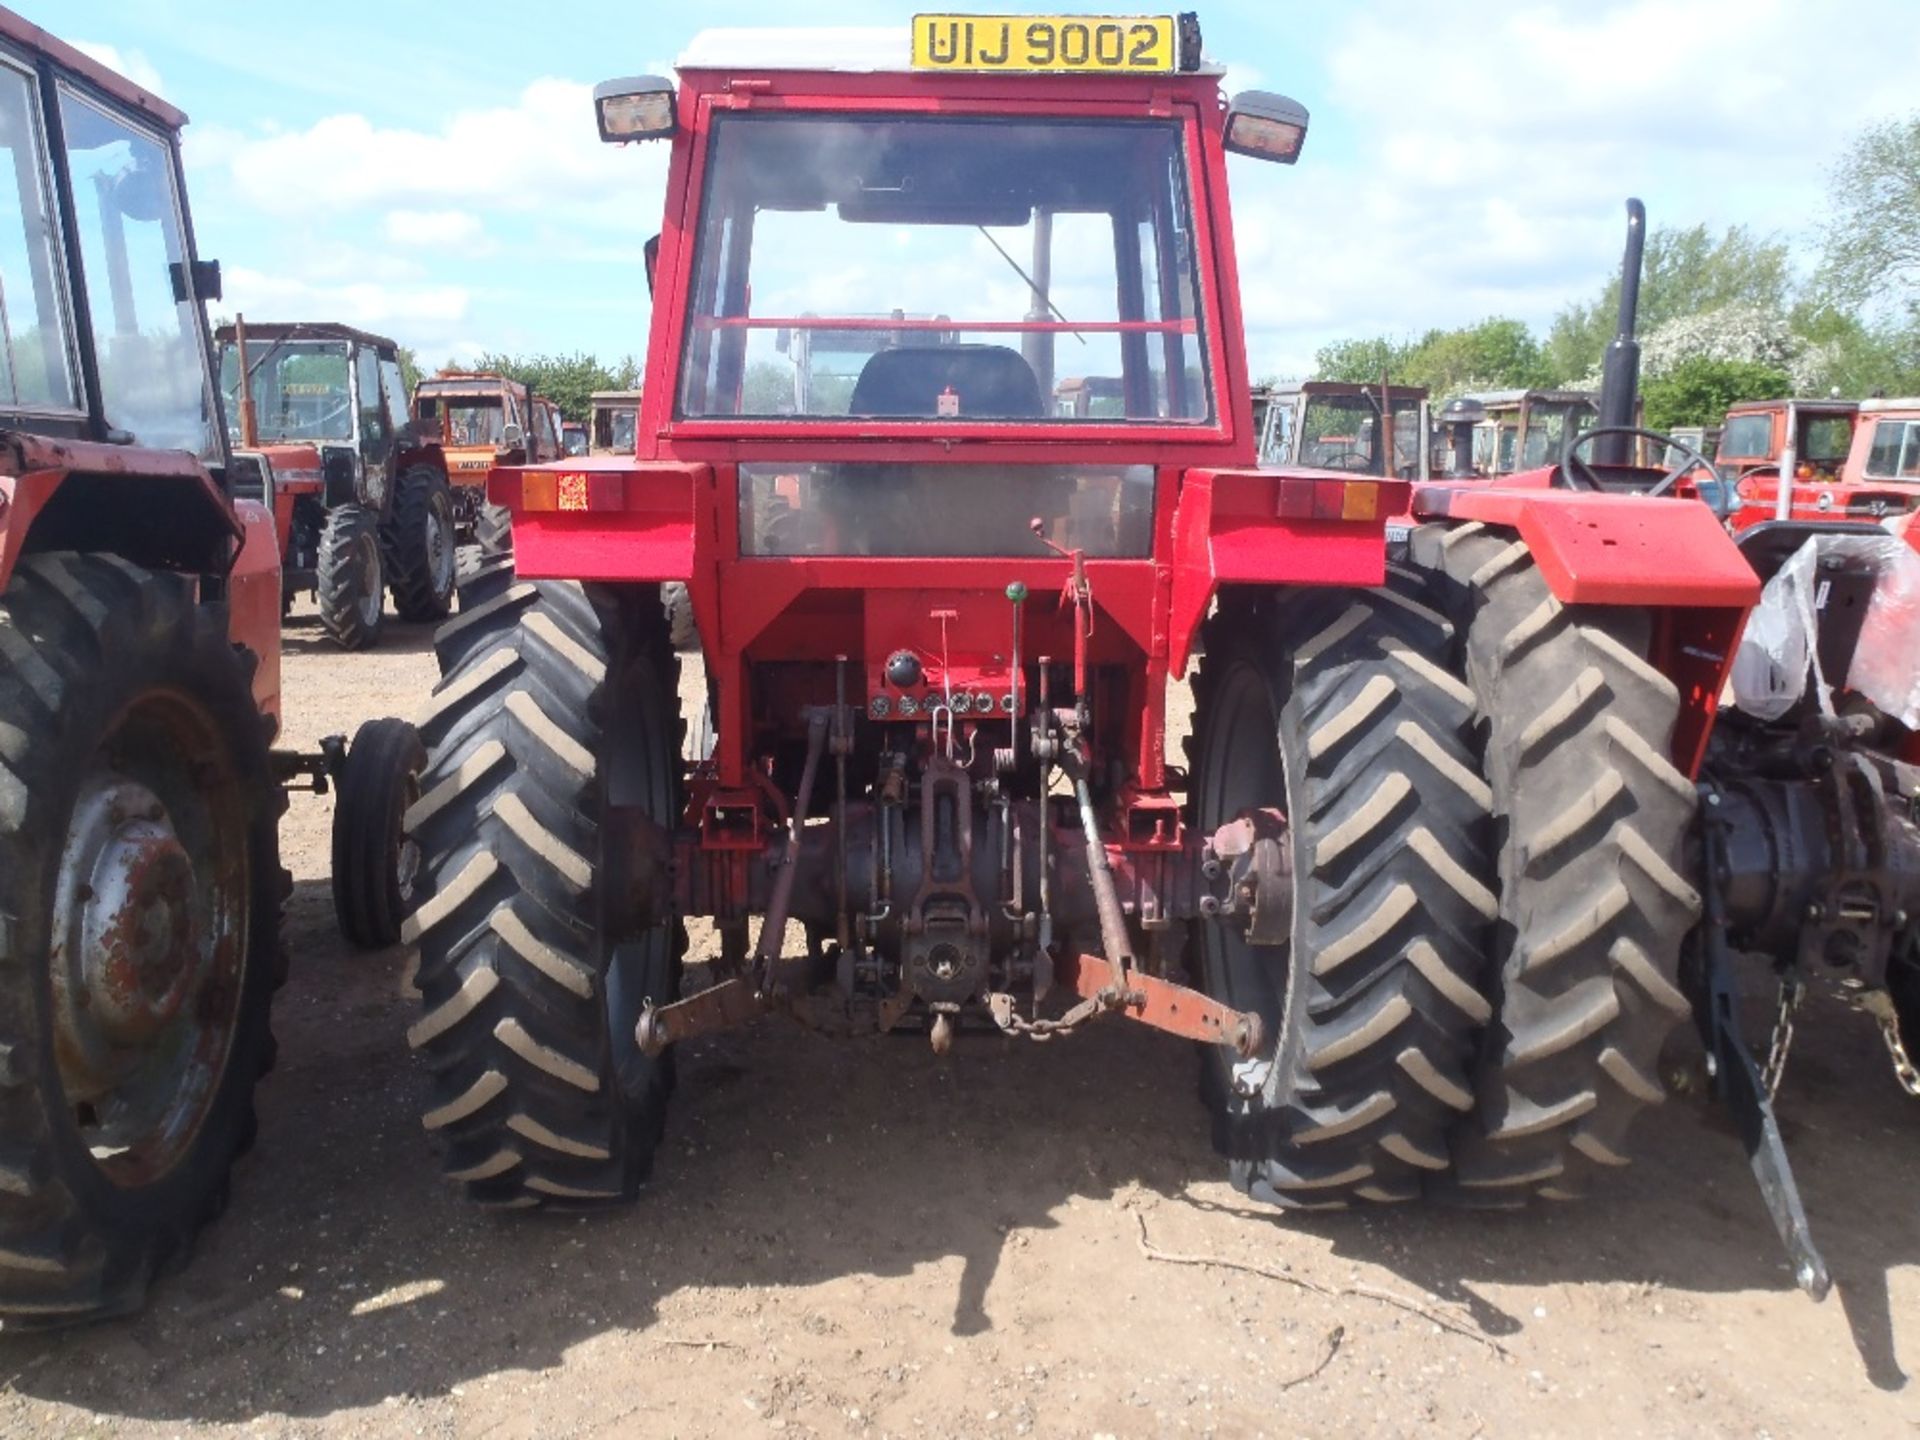 Massey Ferguson 265 8 Speed Tractor with Duncan Lift off Cab. V5 will be supplied - Image 7 of 8